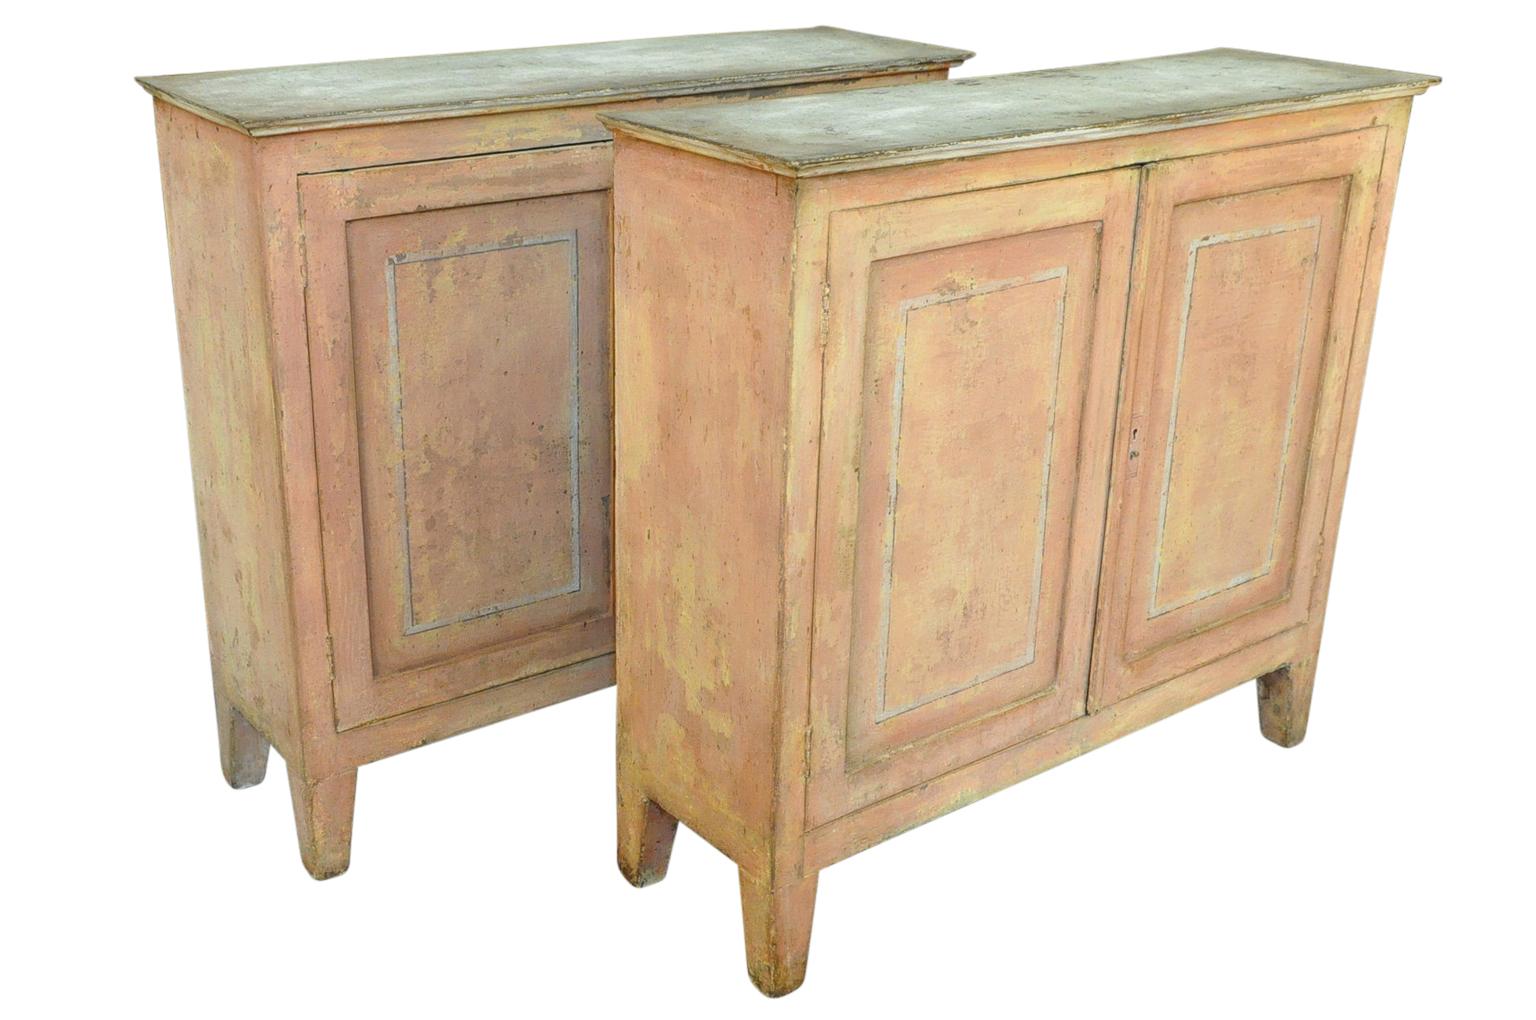 A wonderful pair of later 19th century two-door buffets from the Catalan region of Spain. Wonderfully constructed from painted wood with clean minimalist lines. Terrific color and finish.